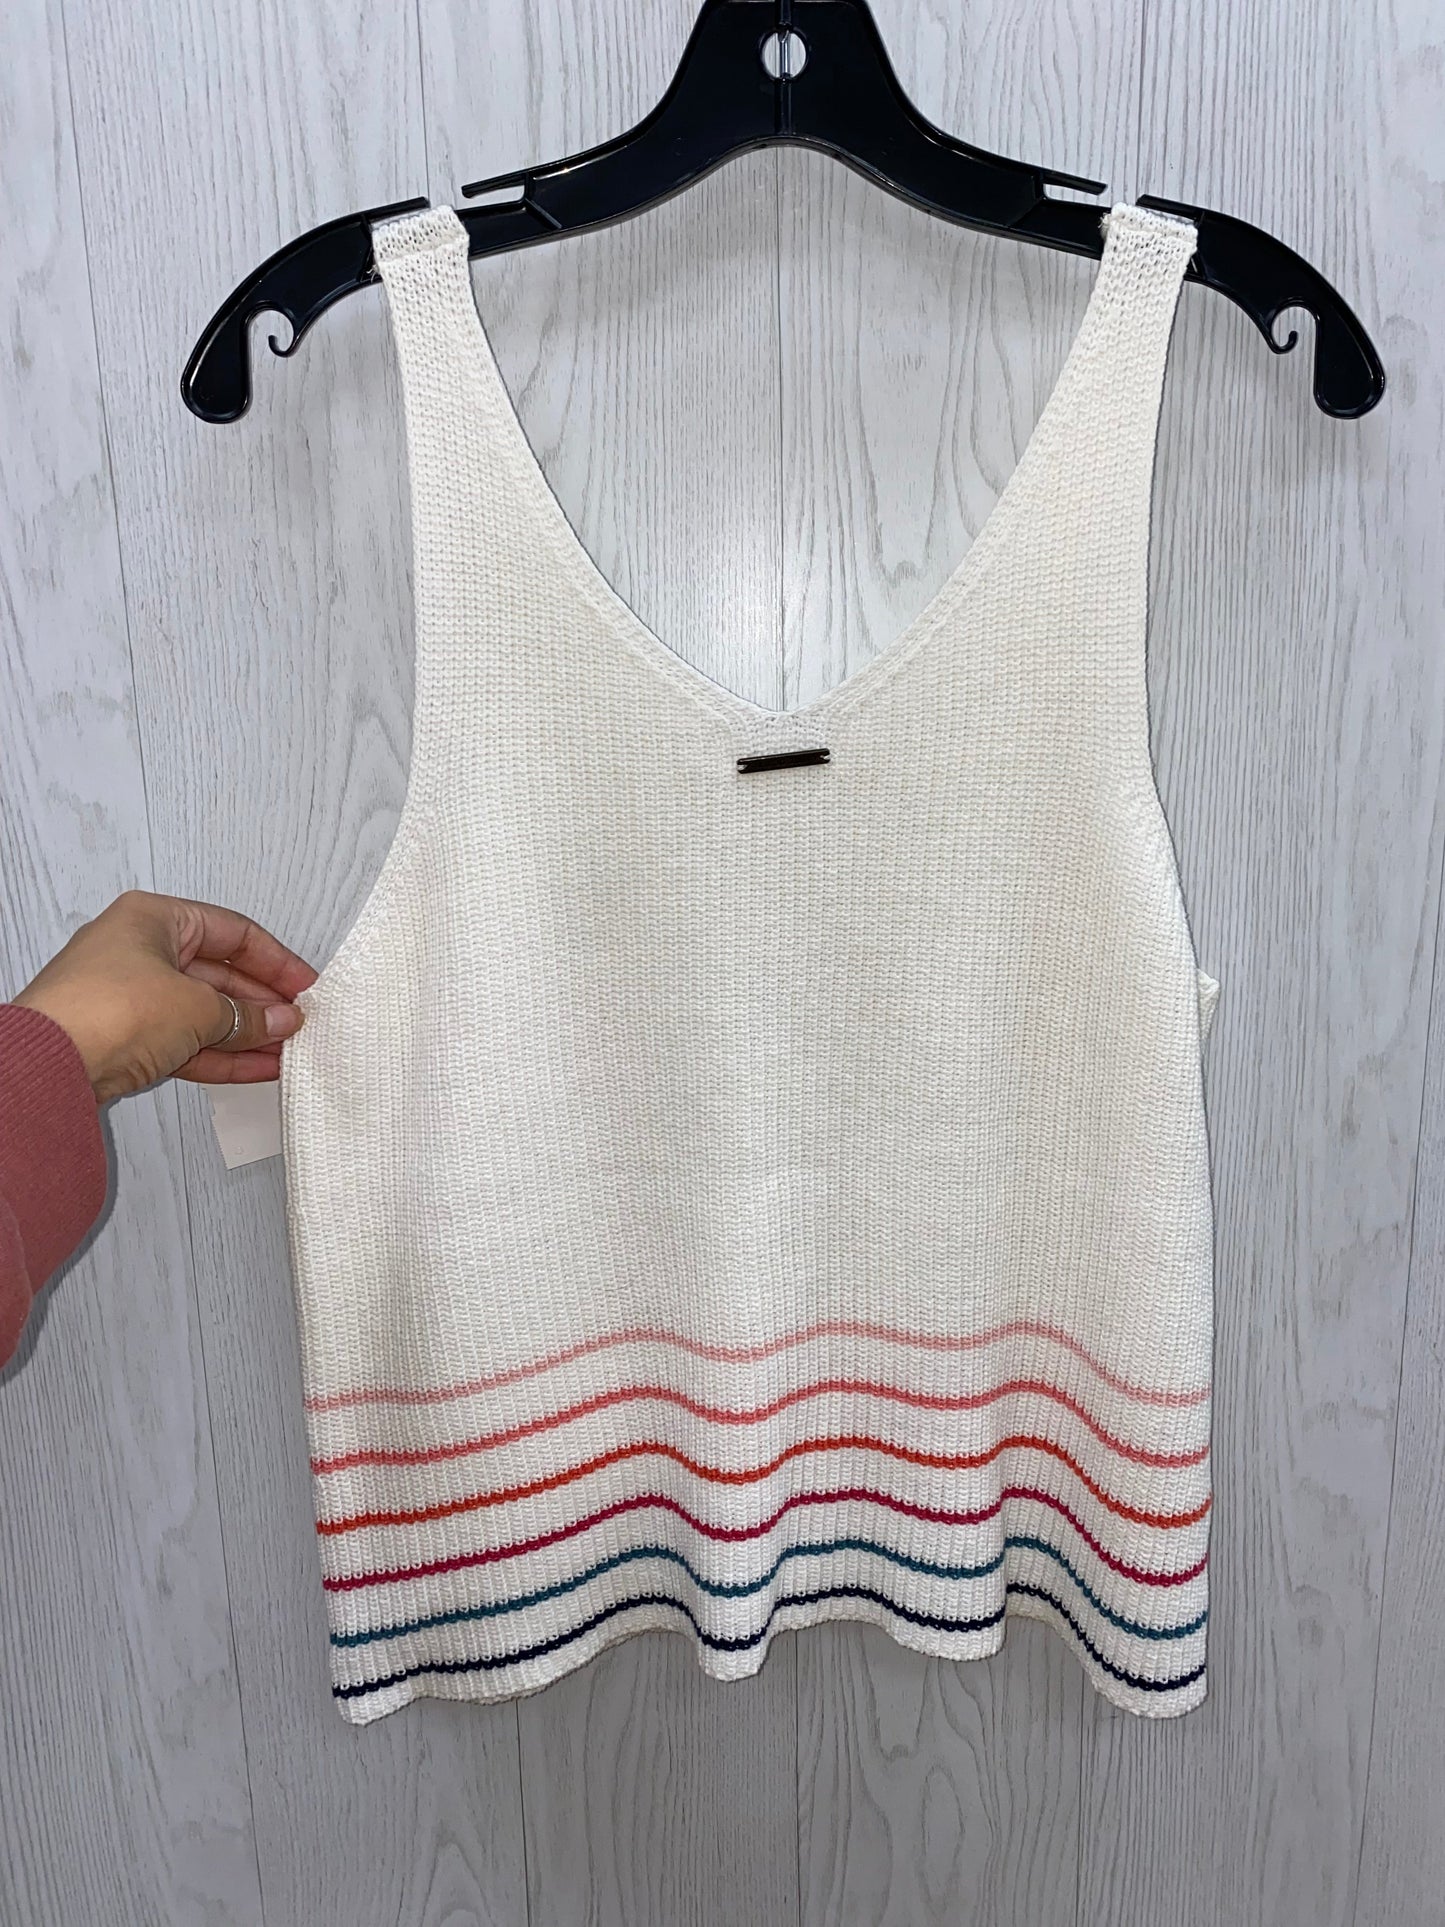 White Top Sleeveless Carve Designs, Size M